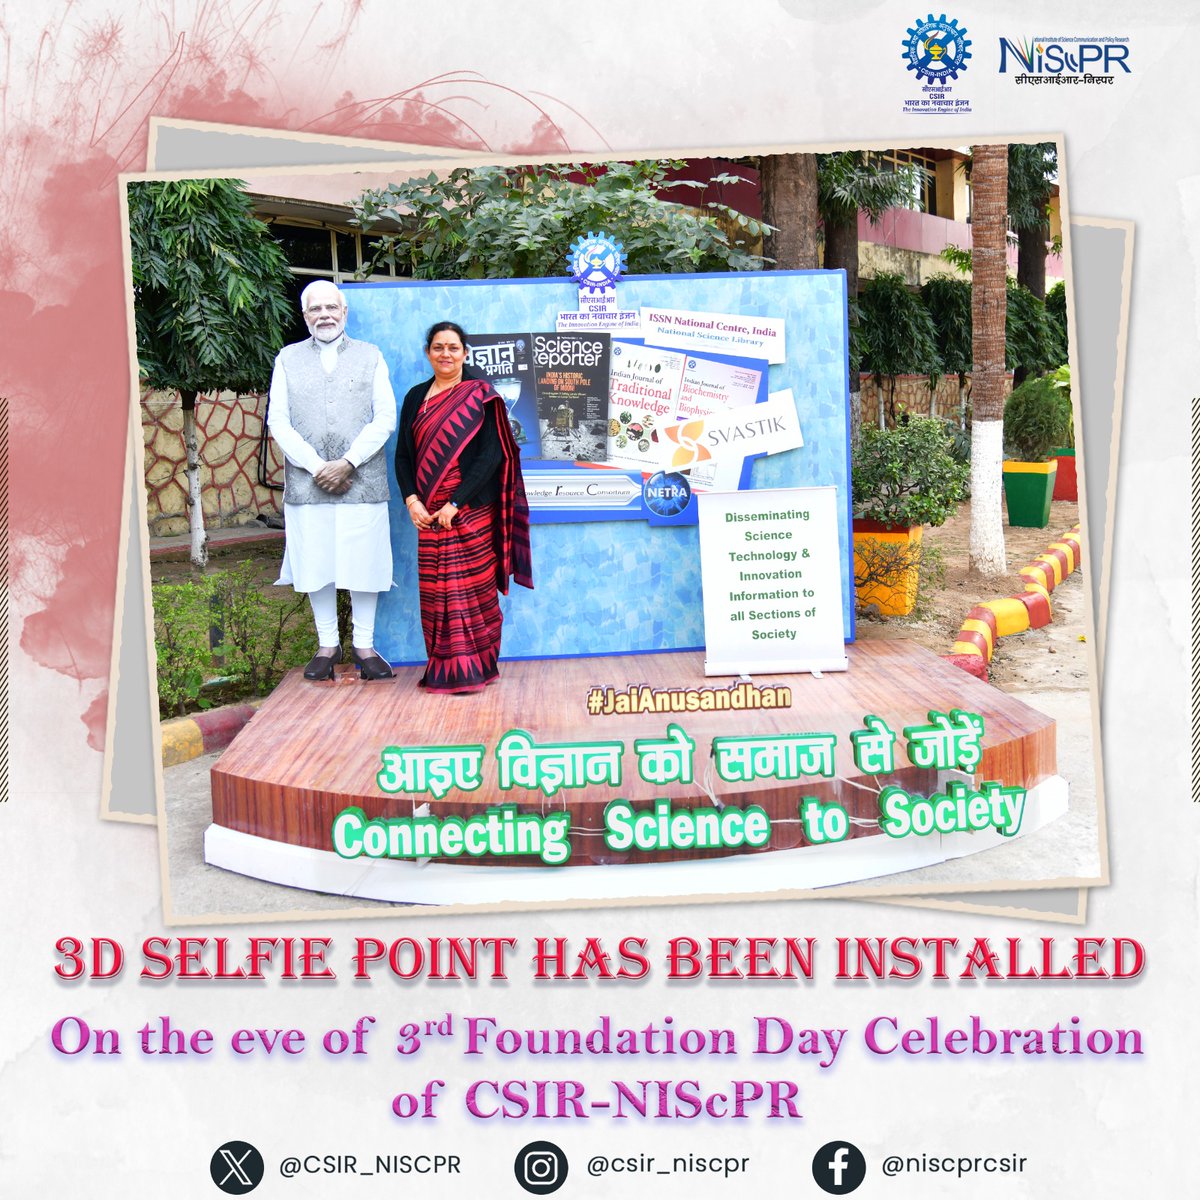 A moment captured @CSIR_NIScPR's 3D selfie photo booth by Institute Director Prof. Ranjana Aggarwal. Selfie booth is installed to add value to the Foundation Day Celebration of NIScPR. @NIScPR_SVASTIK @Ranjana_23 @CSIR_IND @AcSIR_India @SMCC_NIScPR #SMCC #selfie